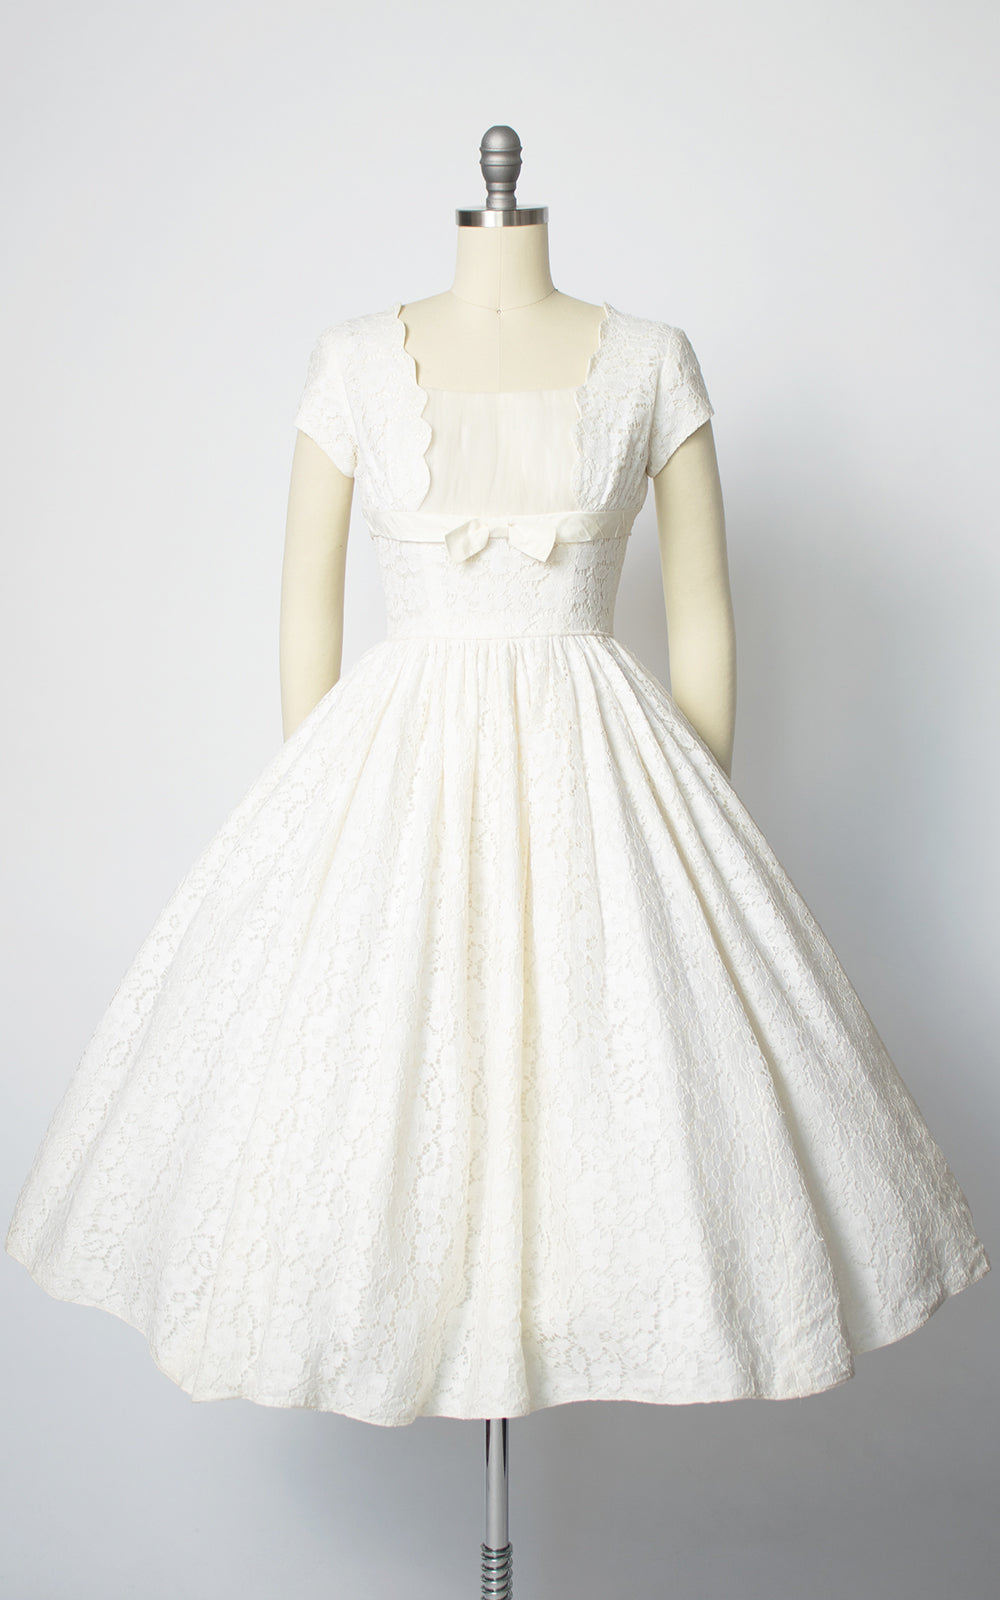 1950s Lace & Tulle Cupcake Wedding Dress